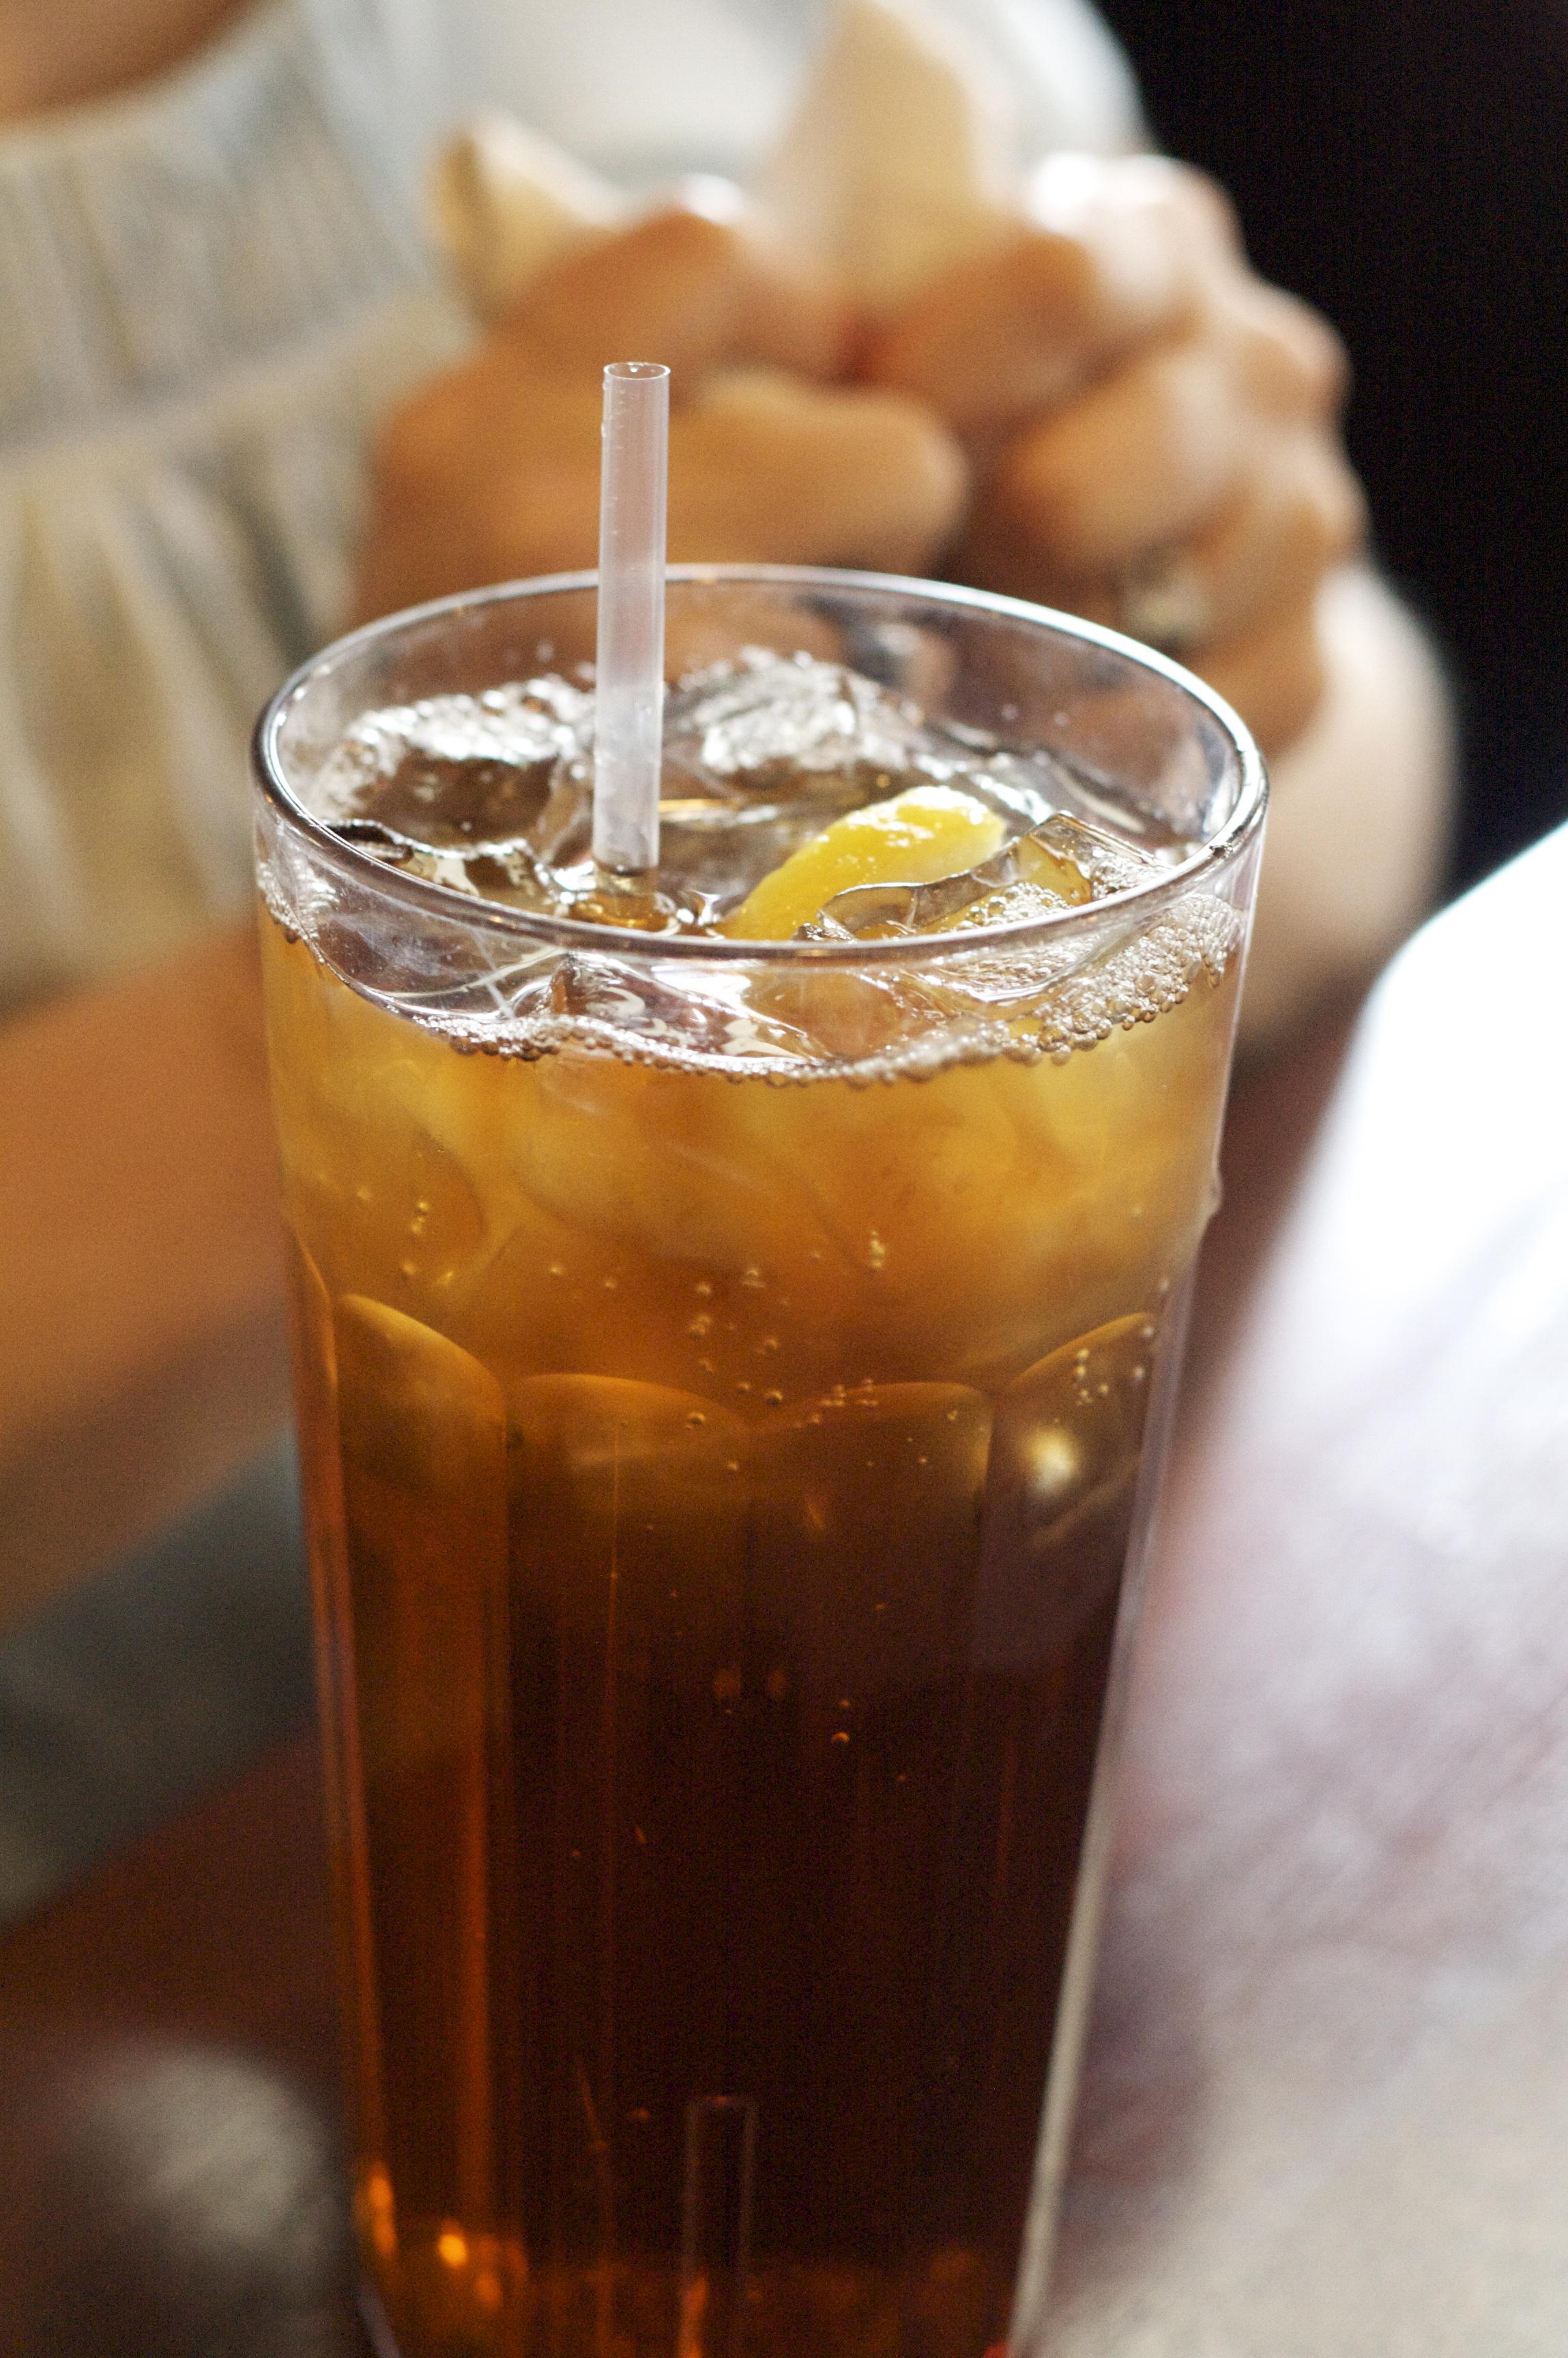 Sweet Tea: A History Of The 'Nectar Of The South' | Georgia Public